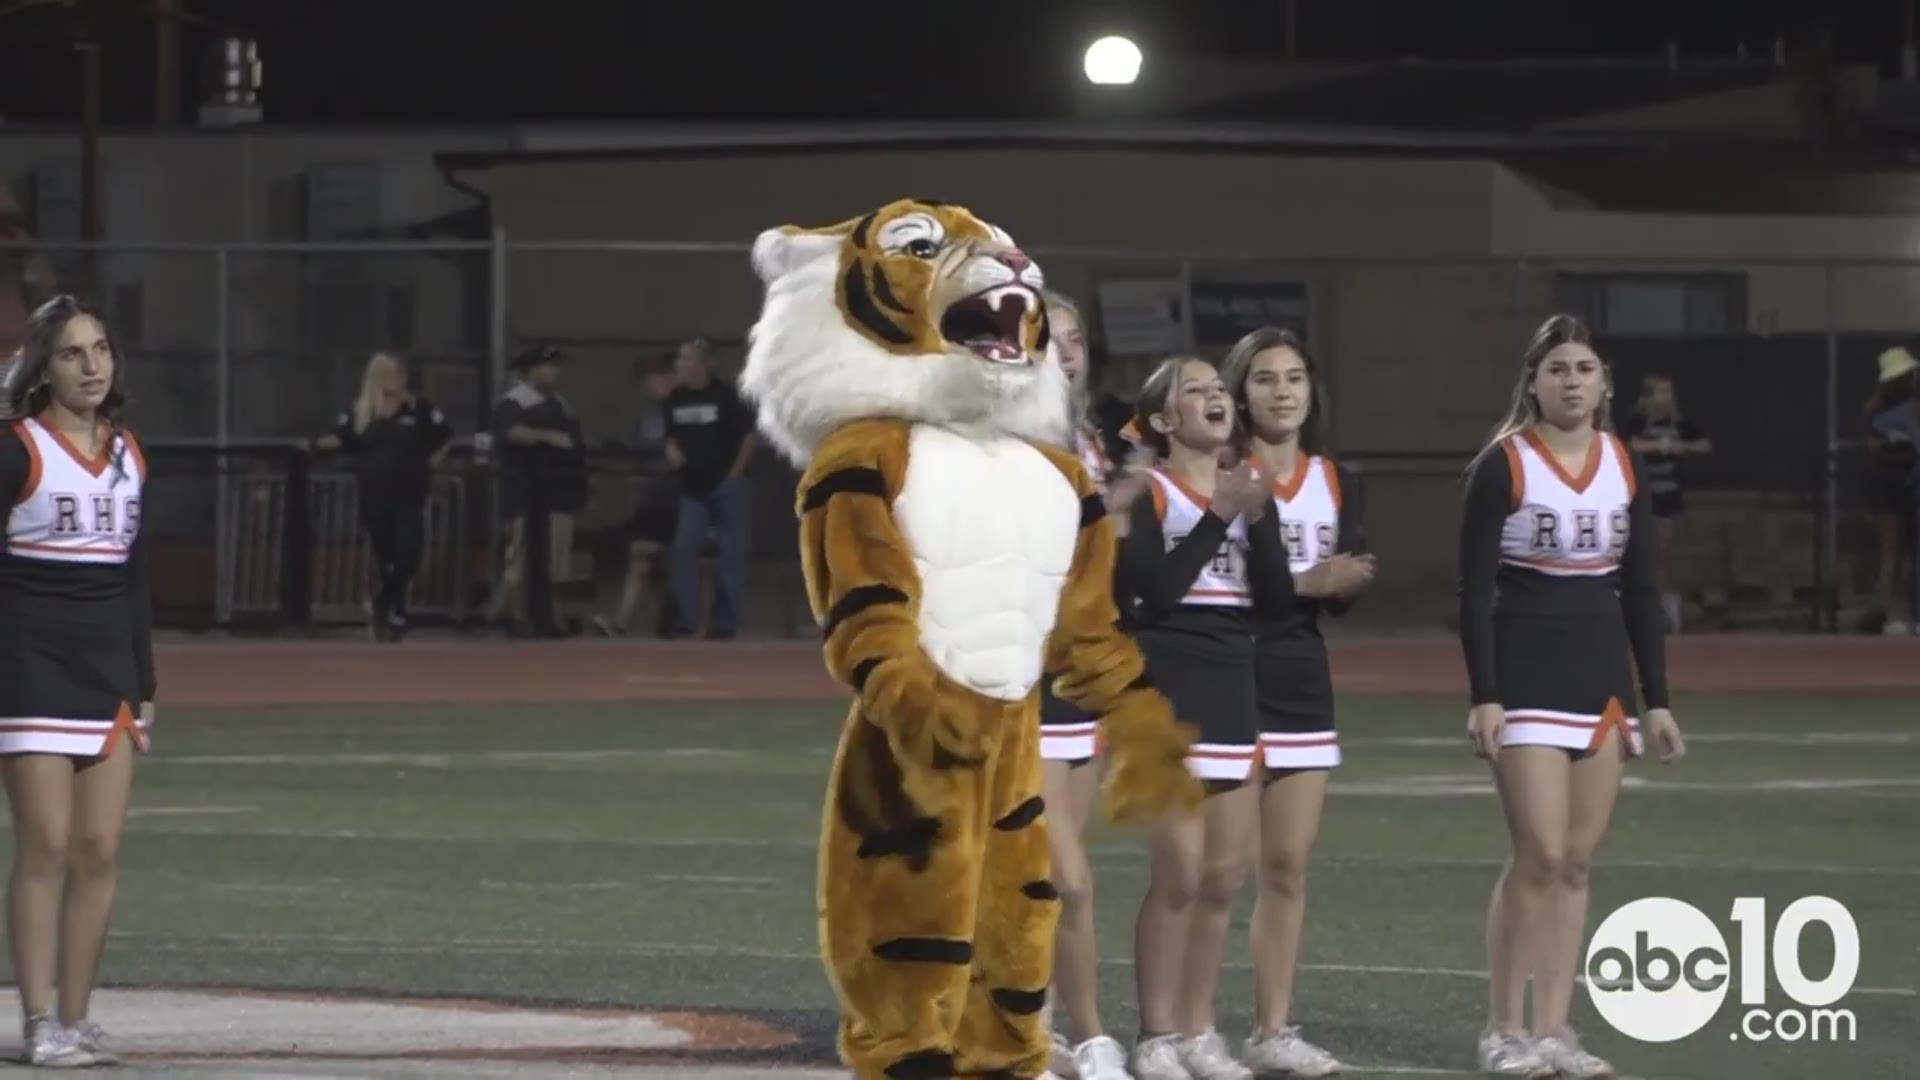 The Roseville Tigers will enter the weekend with a reason to smile as they easily beat the Woodcreek Timber Wolves 55-20.